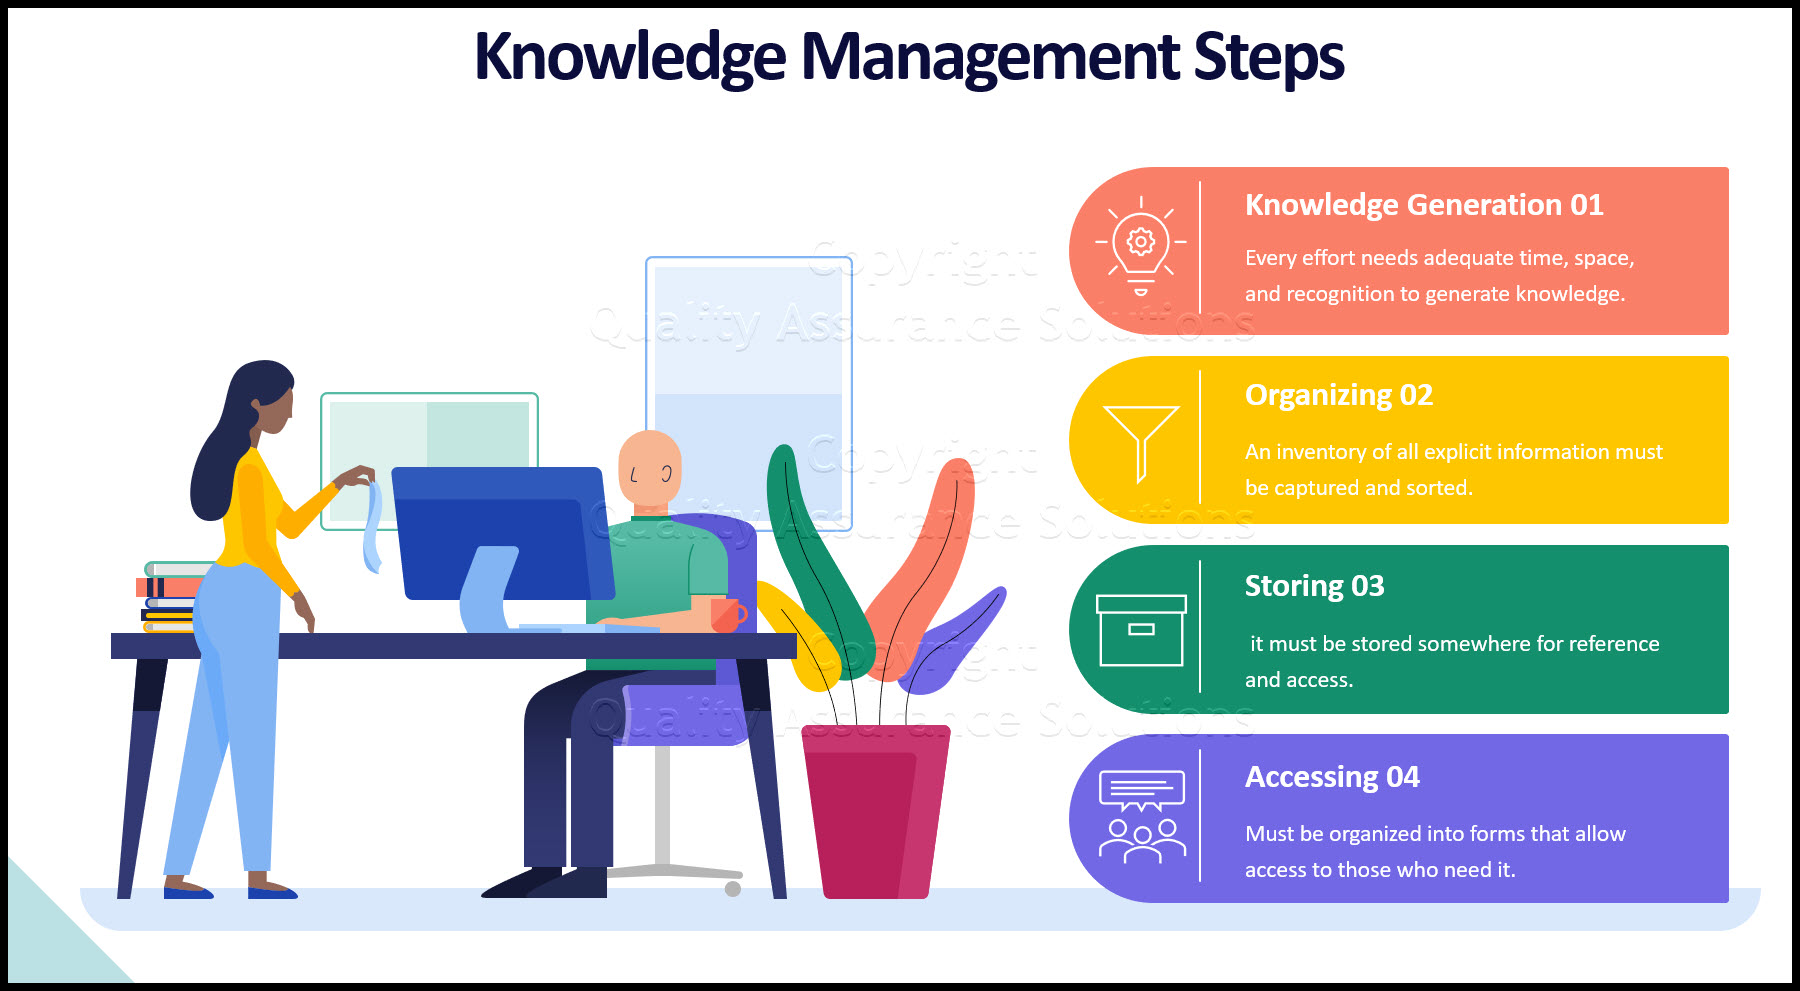 Planning for Knowledge Management (the collective knowledge including skills, data, and information) of an organization. 